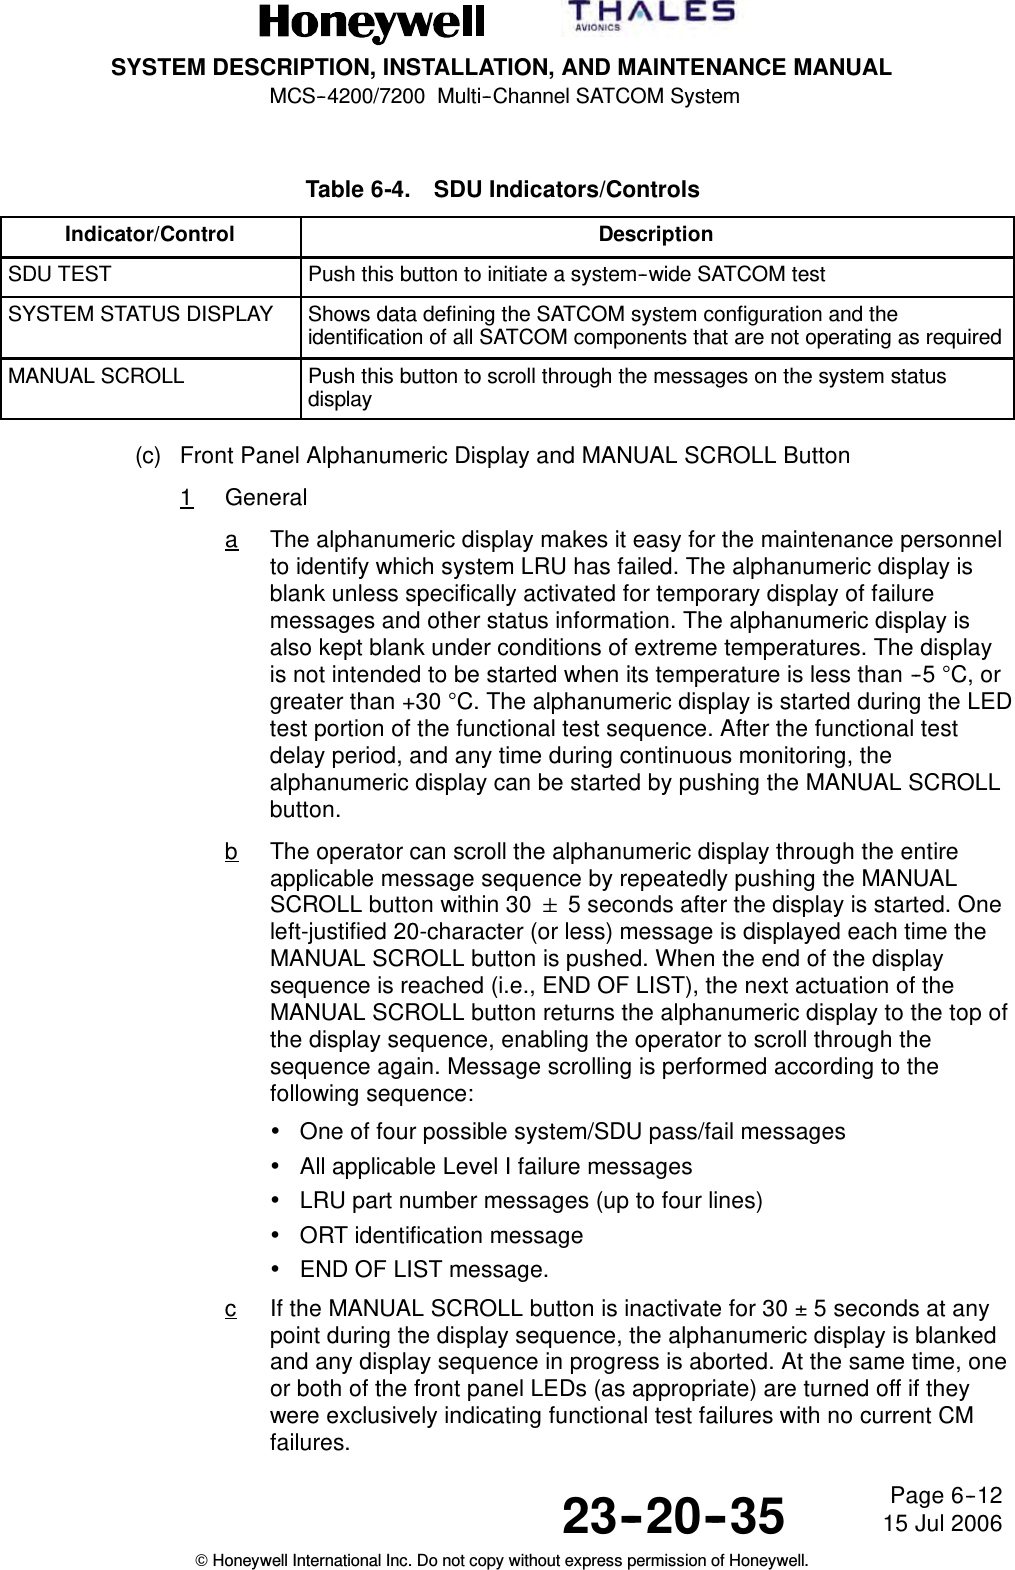 SYSTEM DESCRIPTION, INSTALLATION, AND MAINTENANCE MANUALMCS--4200/7200 Multi--Channel SATCOM System23--20--35 15 Jul 2006Honeywell International Inc. Do not copy without express permission of Honeywell.Page 6--12Table 6-4. SDU Indicators/ControlsIndicator/Control DescriptionSDU TEST Push this button to initiate a system--wide SATCOM testSYSTEM STATUS DISPLAY Shows data defining the SATCOM system configuration and theidentification of all SATCOM components that are not operating as requiredMANUAL SCROLL Push this button to scroll through the messages on the system statusdisplay(c) Front Panel Alphanumeric Display and MANUAL SCROLL Button1GeneralaThe alphanumeric display makes it easy for the maintenance personnelto identify which system LRU has failed. The alphanumeric display isblank unless specifically activated for temporary display of failuremessages and other status information. The alphanumeric display isalso kept blank under conditions of extreme temperatures. The displayis not intended to be started when its temperature is less than --5 °C, orgreater than +30 °C. The alphanumeric display is started during the LEDtest portion of the functional test sequence. After the functional testdelay period, and any time during continuous monitoring, thealphanumeric display can be started by pushing the MANUAL SCROLLbutton.bThe operator can scroll the alphanumeric display through the entireapplicable message sequence by repeatedly pushing the MANUALSCROLL button within 30 5 seconds after the display is started. Oneleft-justified 20-character (or less) message is displayed each time theMANUAL SCROLL button is pushed. When the end of the displaysequence is reached (i.e., END OF LIST), the next actuation of theMANUAL SCROLL button returns the alphanumeric display to the top ofthe display sequence, enabling the operator to scroll through thesequence again. Message scrolling is performed according to thefollowing sequence:•One of four possible system/SDU pass/fail messages•All applicable Level I failure messages•LRU part number messages (up to four lines)•ORT identification message•END OF LIST message.cIf the MANUAL SCROLL button is inactivate for 30 ±5 seconds at anypoint during the display sequence, the alphanumeric display is blankedand any display sequence in progress is aborted. At the same time, oneor both of the front panel LEDs (as appropriate) are turned off if theywere exclusively indicating functional test failures with no current CMfailures.